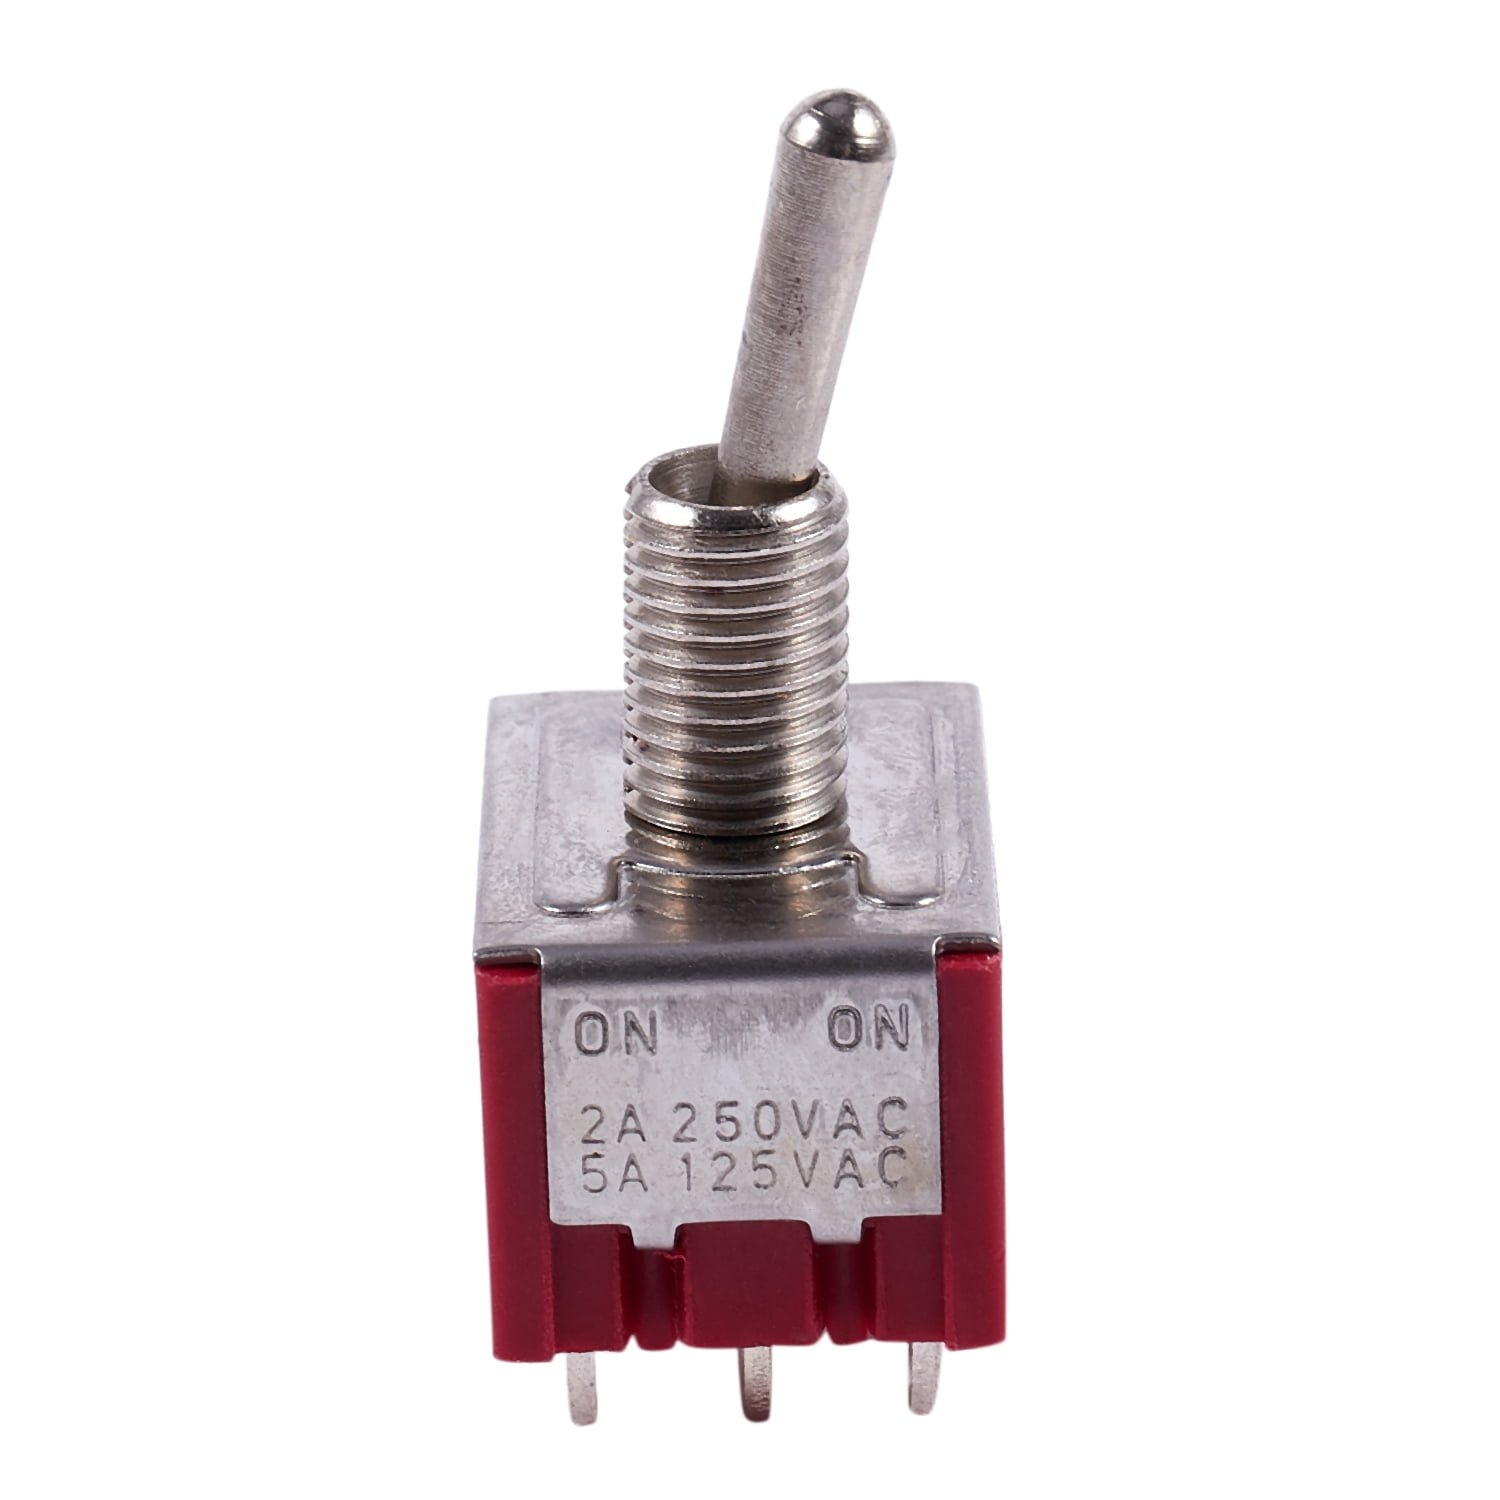 Rocker Switch 250V 15A On/Off One-From Switch Metal 2 Pin 4x Screw Contact 